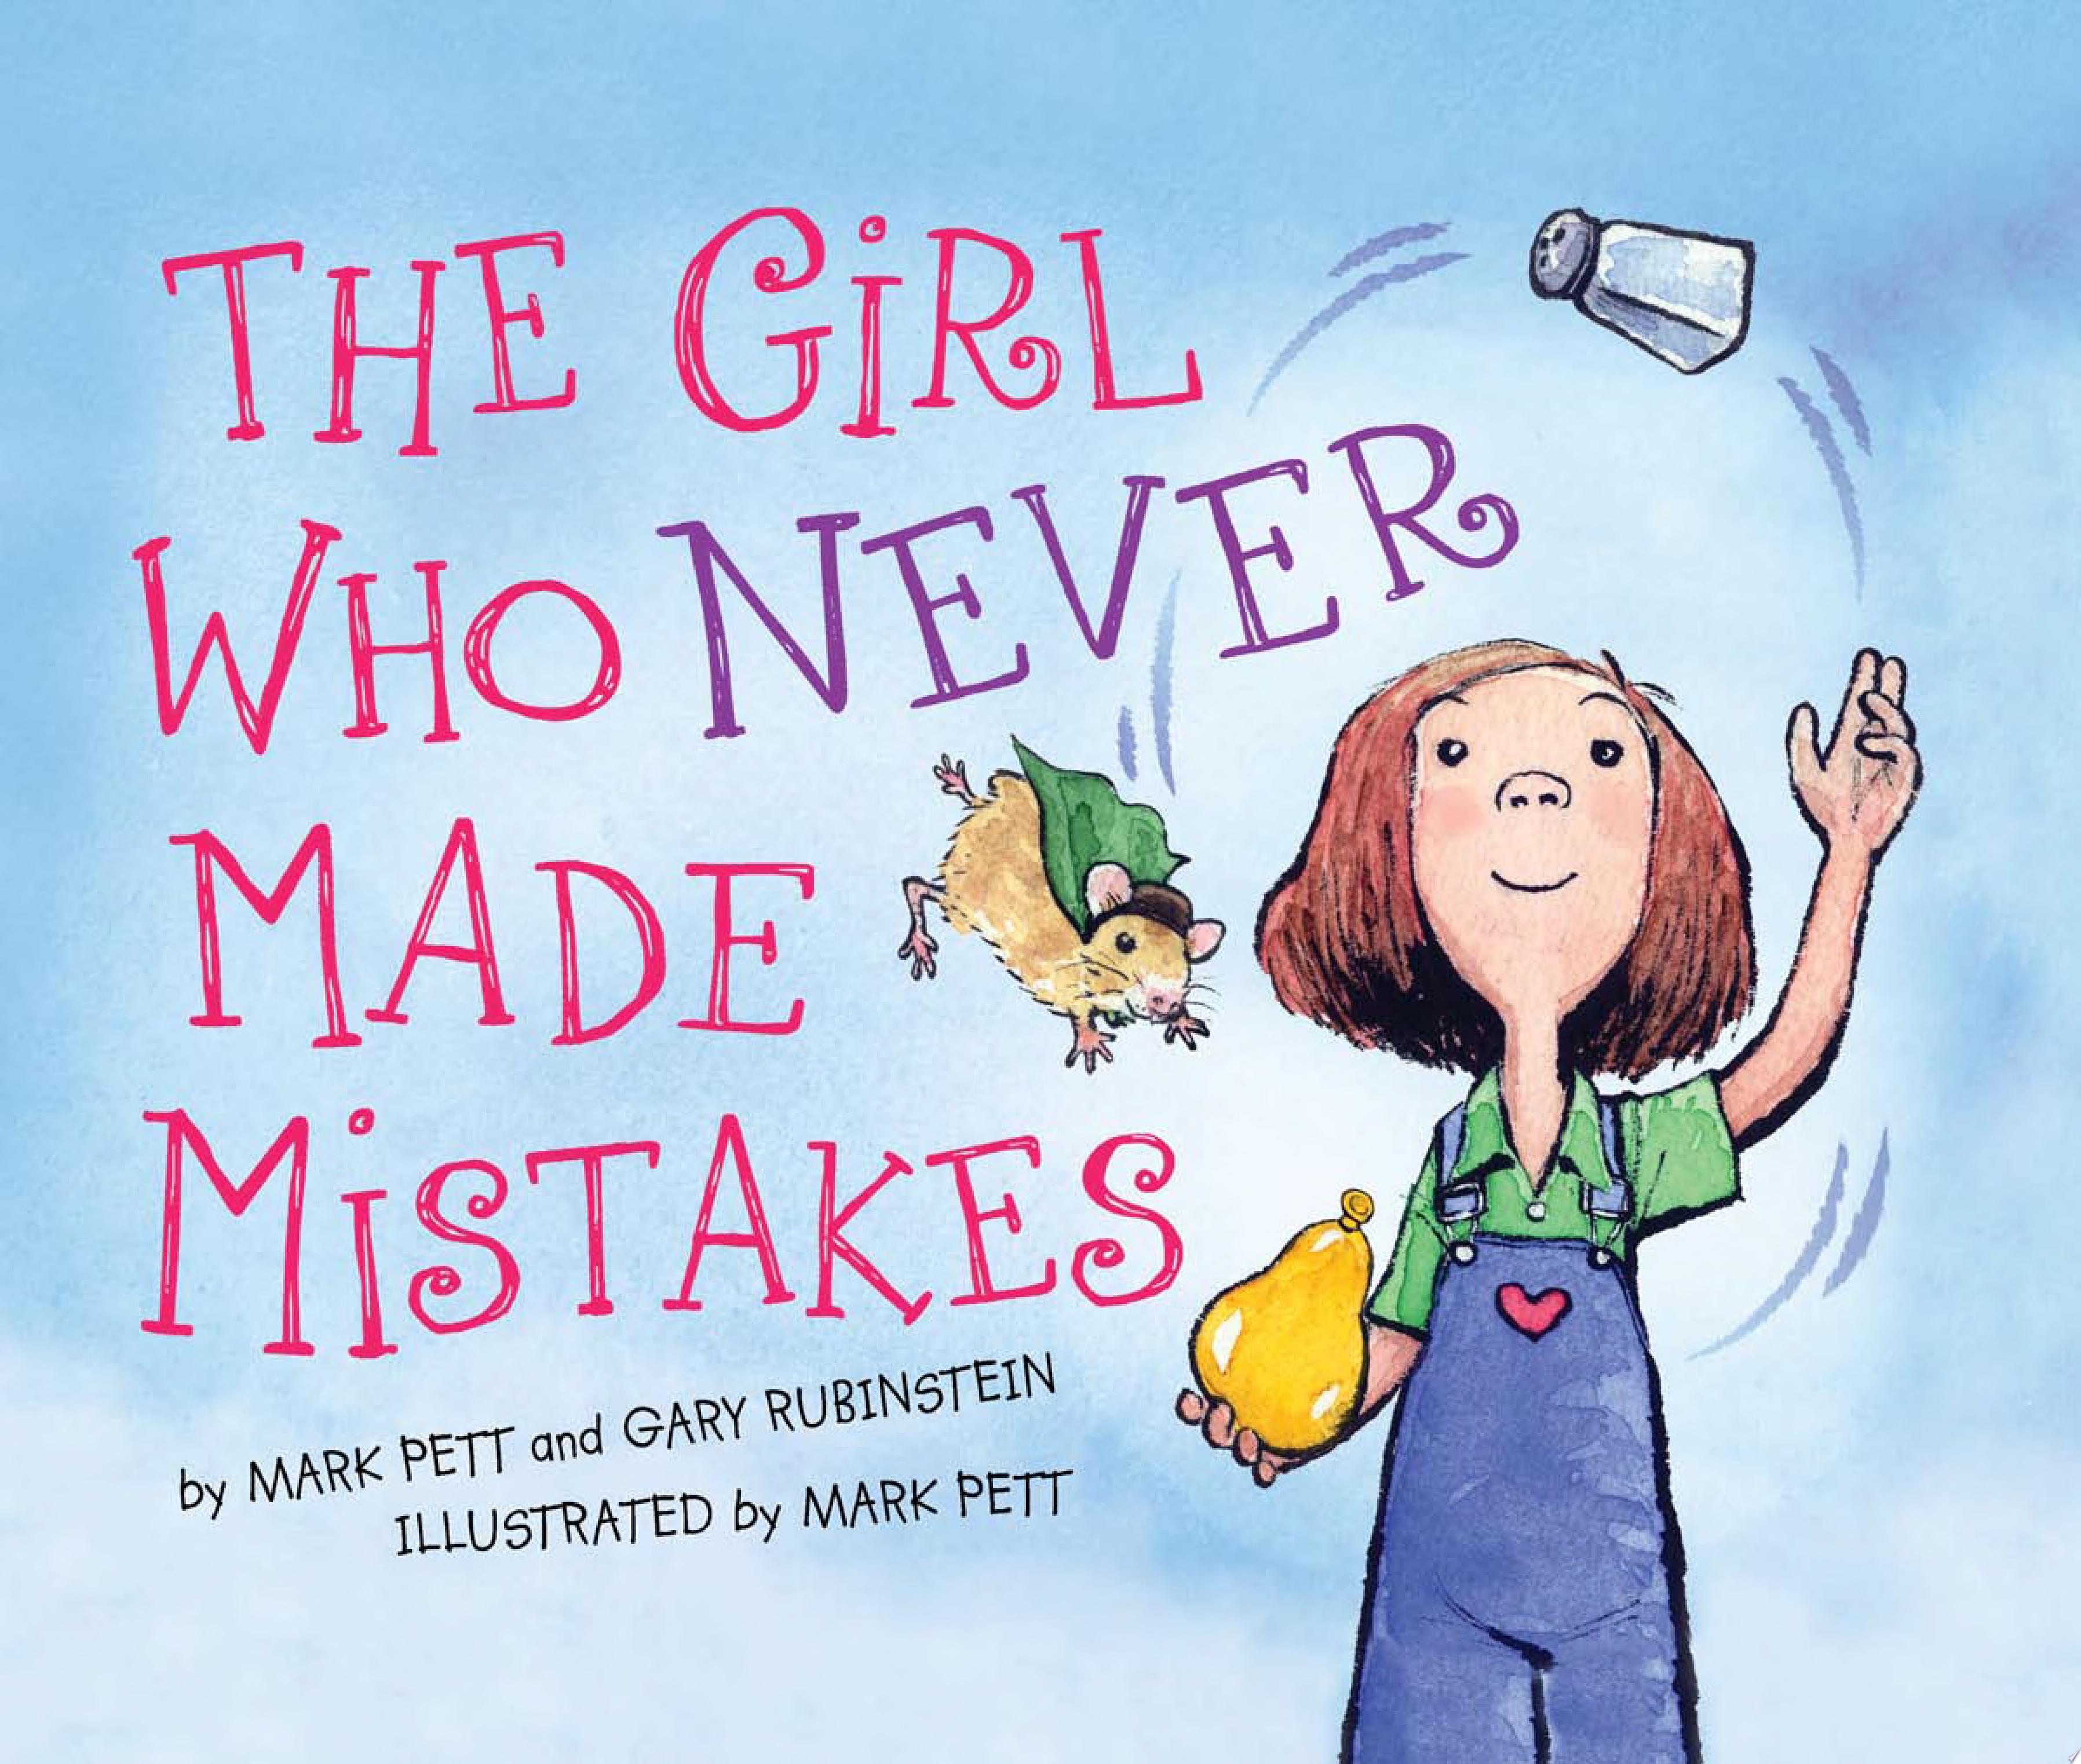 Image for "The Girl who Never Made Mistakes"